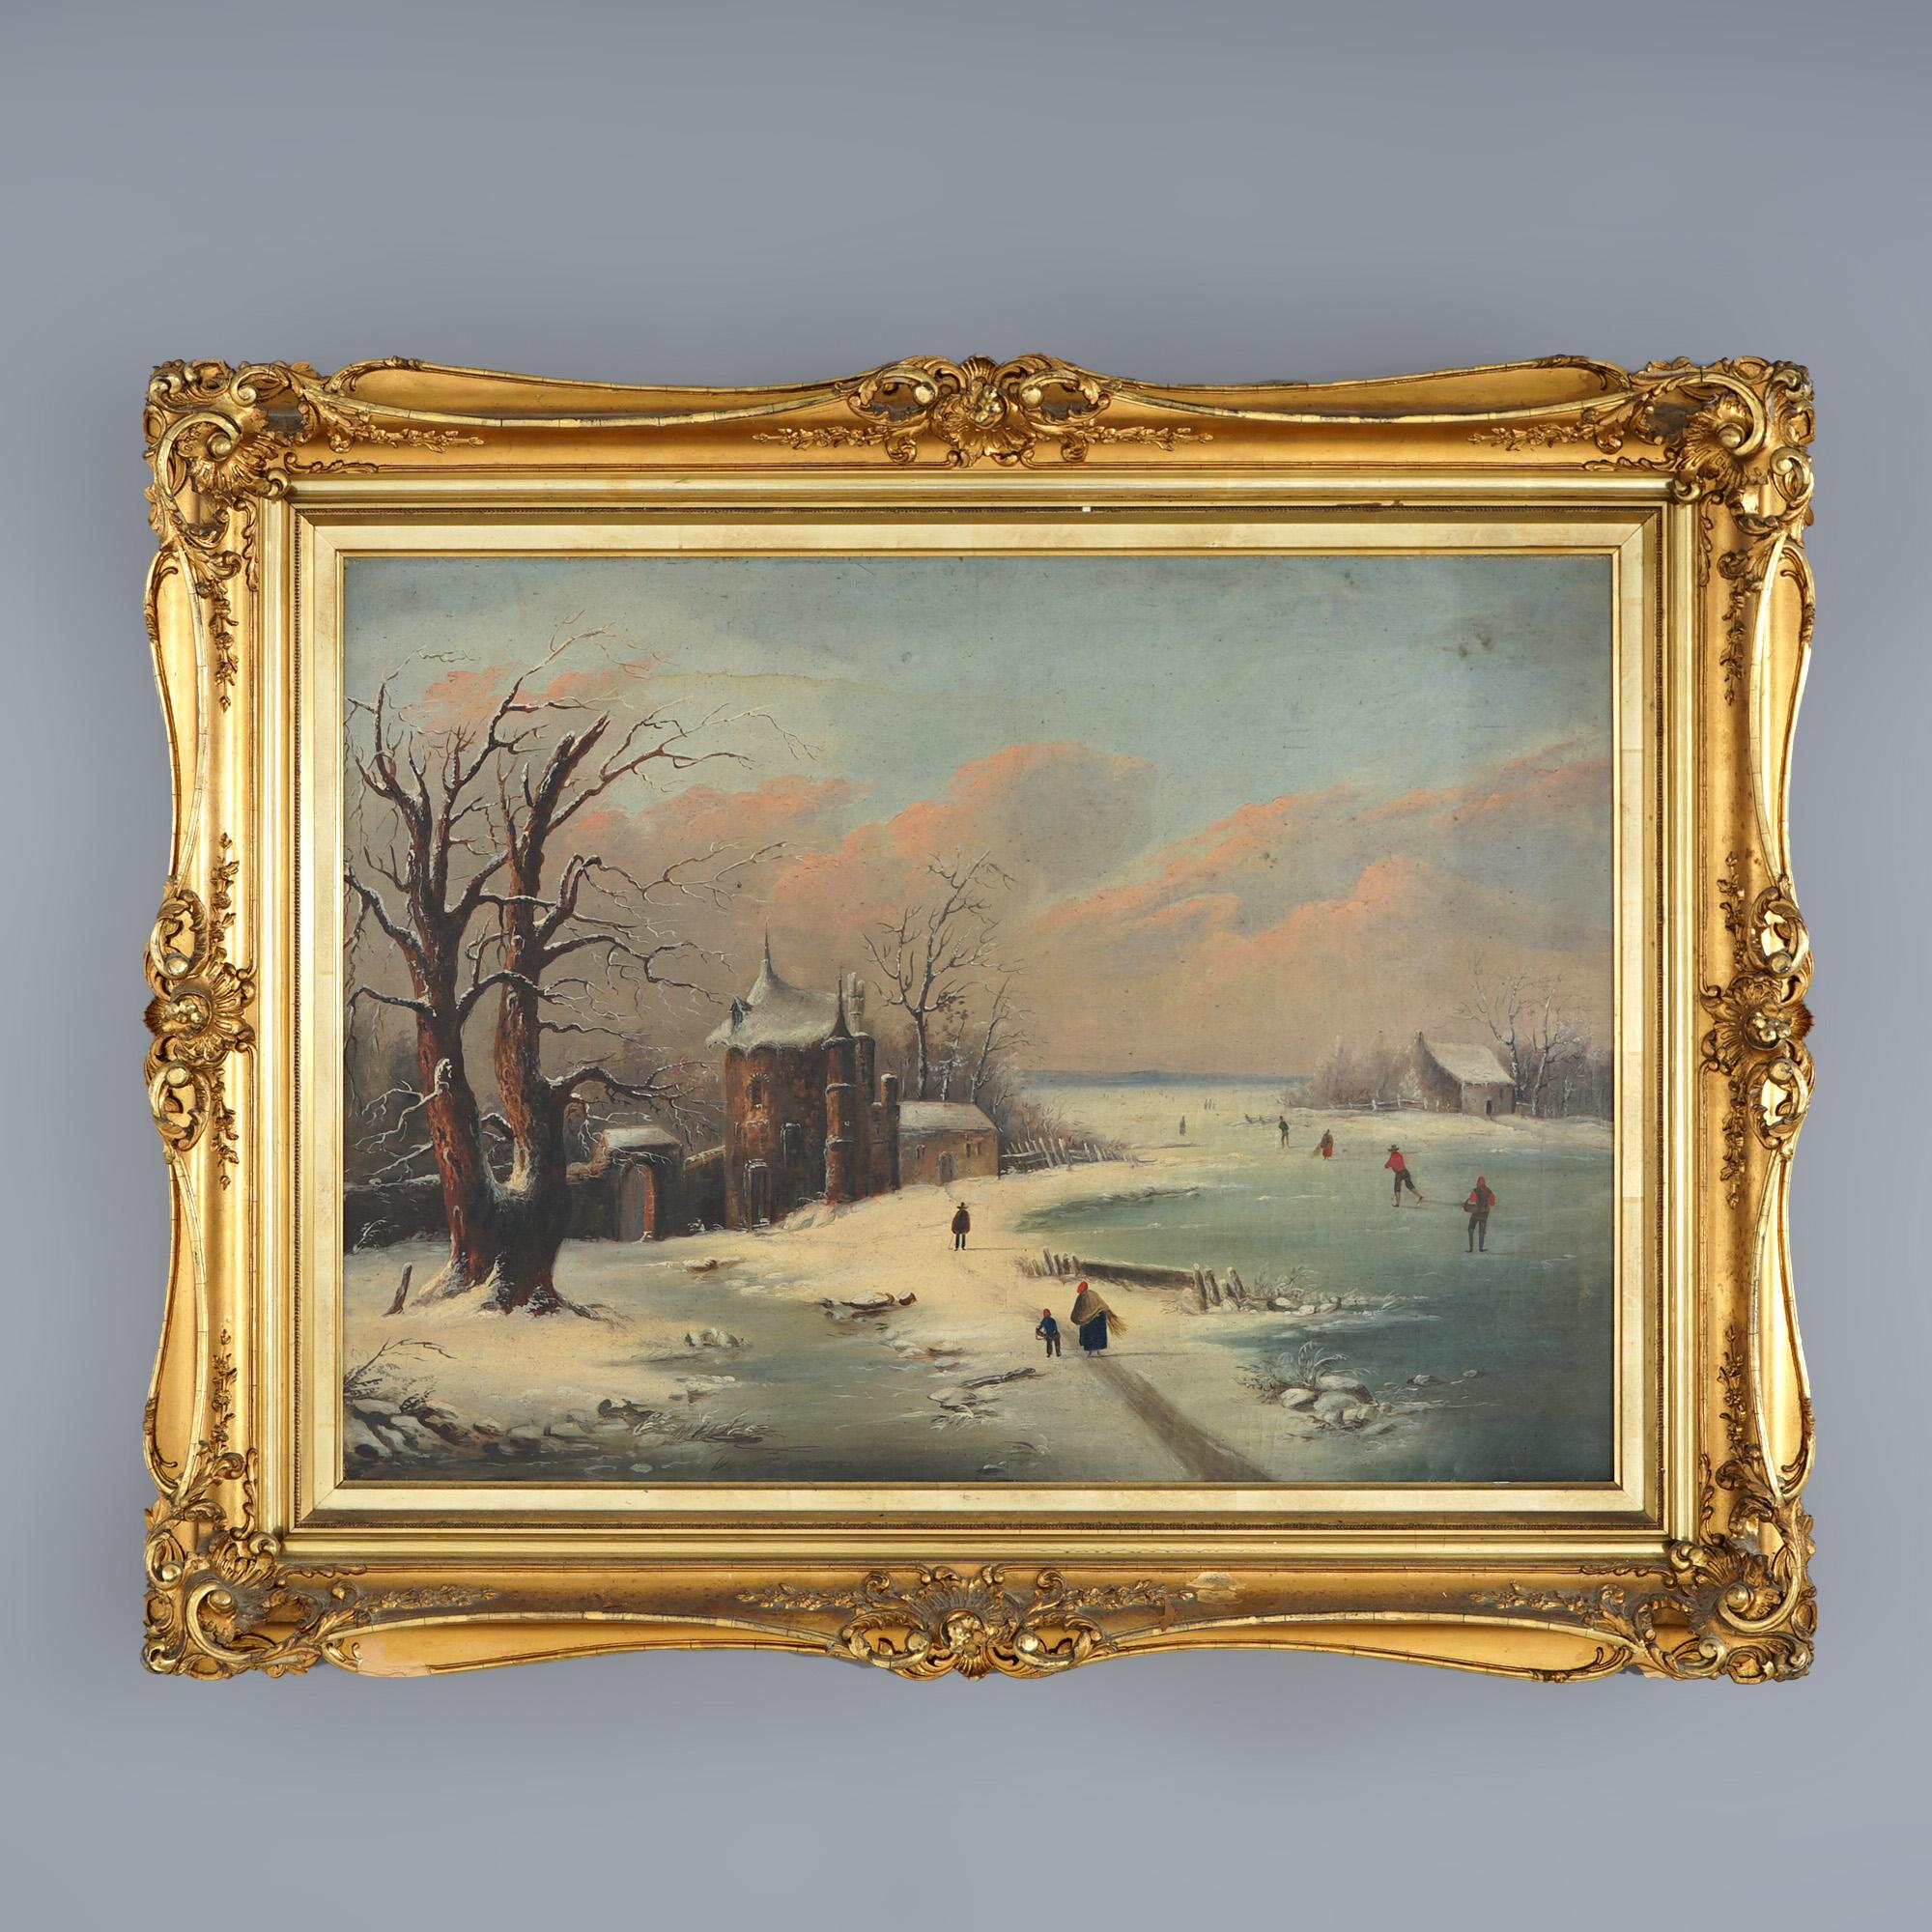 An antique painting offers oil on canvas Dutch winter scene with ice skaters on pond with structures, seated in giltwood frame, c1890

Measures - 31